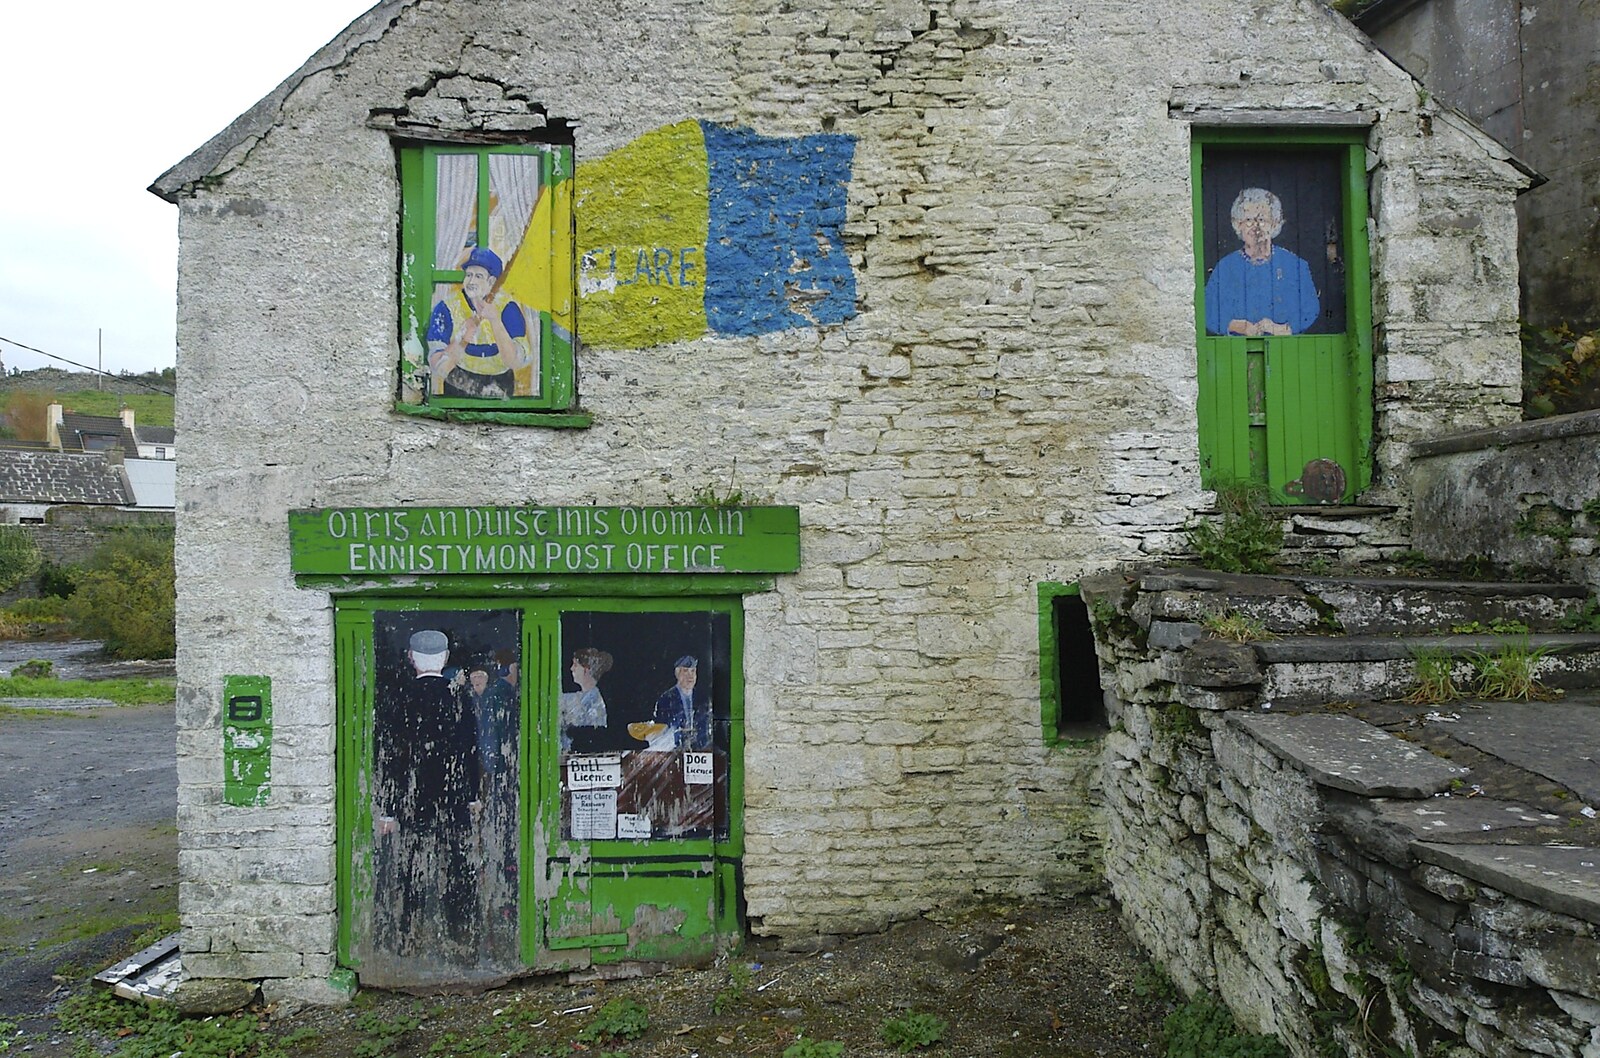 A painted shop from Corofin, Ennistymon and The Burran, County Clare, Western Ireland - 27th October 2006